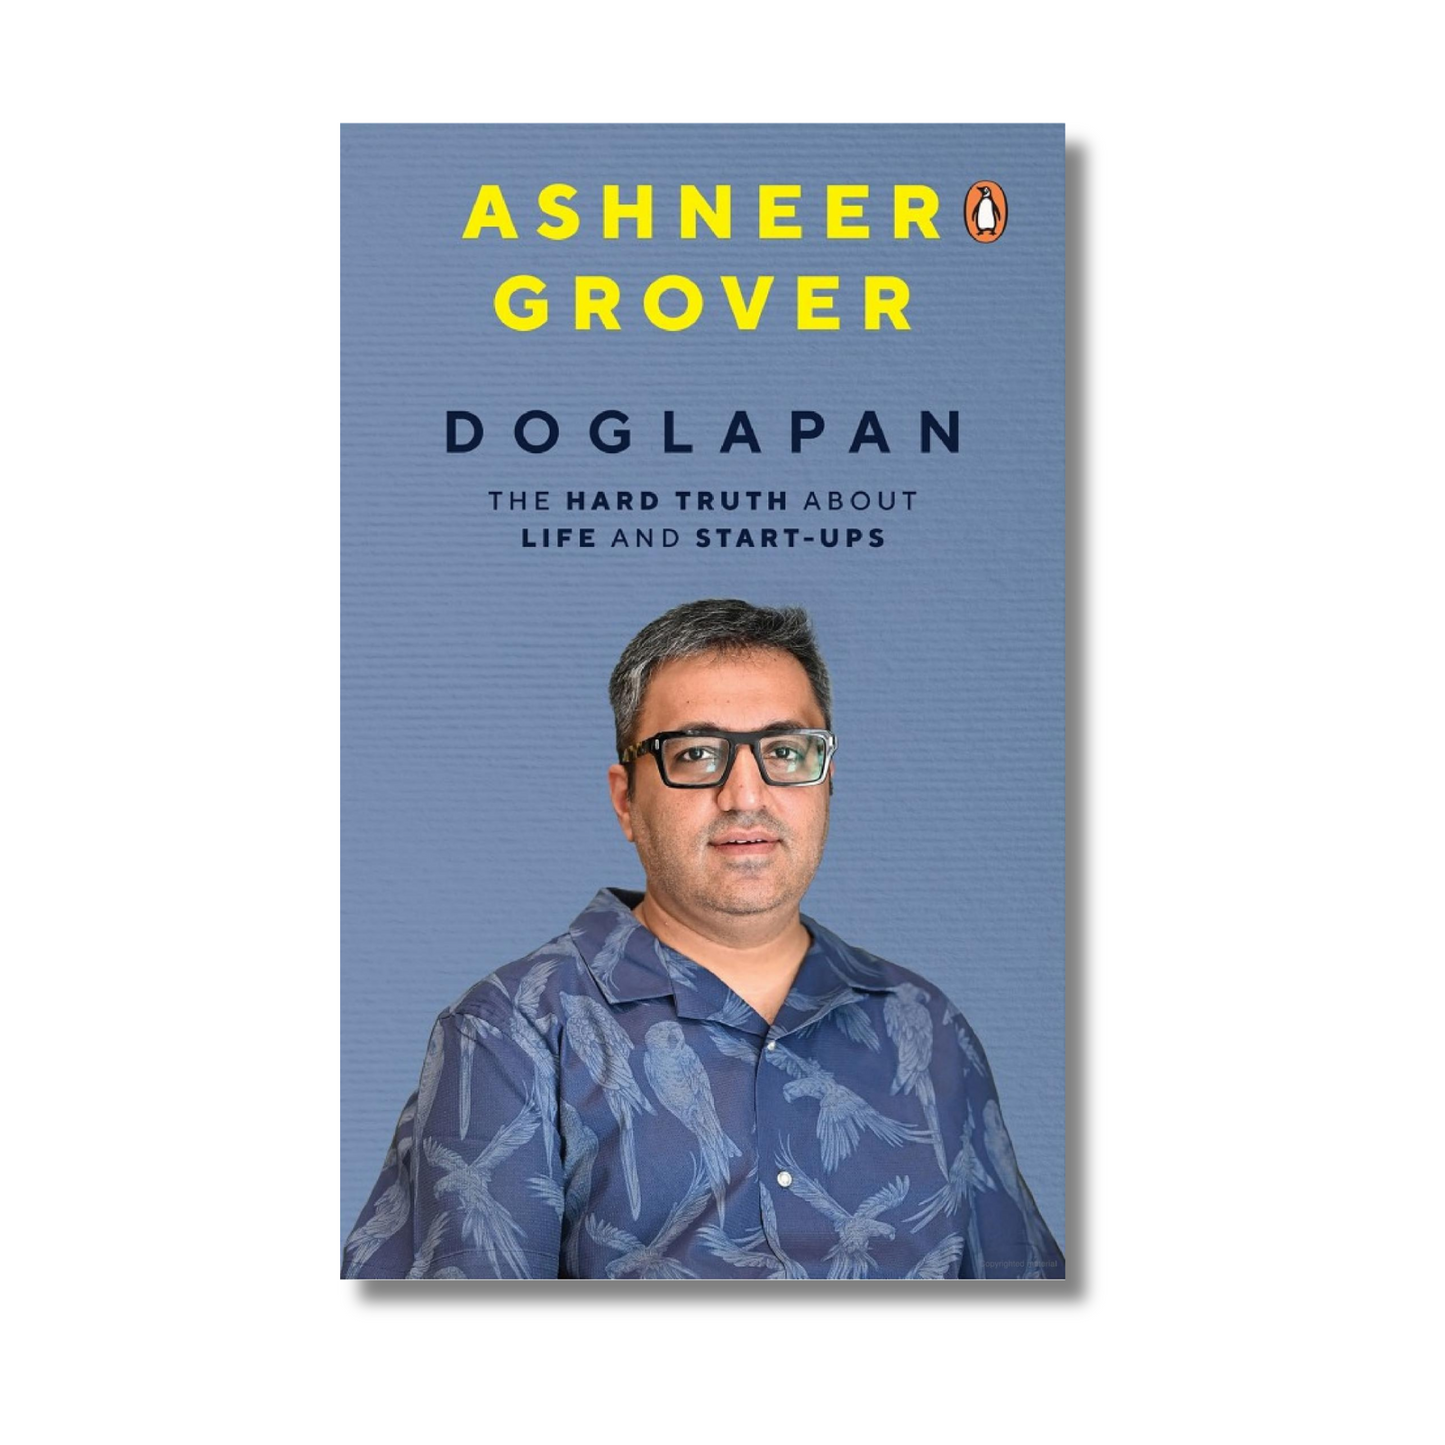 Doglapan: The Hard Truth about Life and Start-Ups by Ashneer Grover (Paperback)